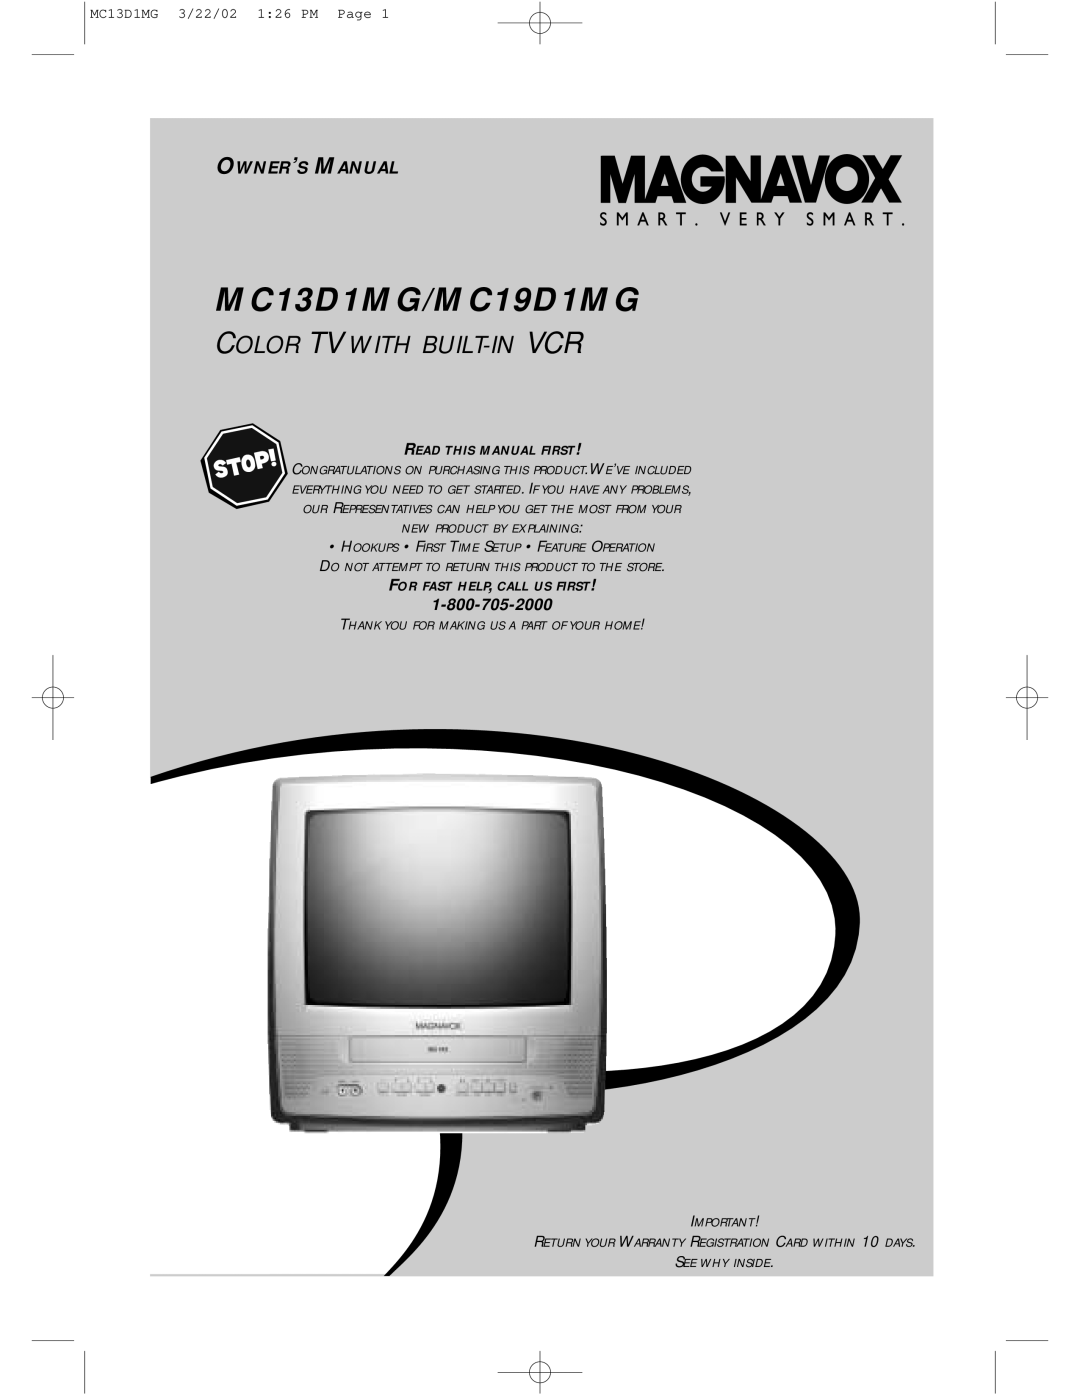 Magnavox owner manual MC13D1MG/MC19D1MG, Color Tv With Built-In Vcr, Owner’S Manual, MC13D1MG 3/22/02 126 PM Page 